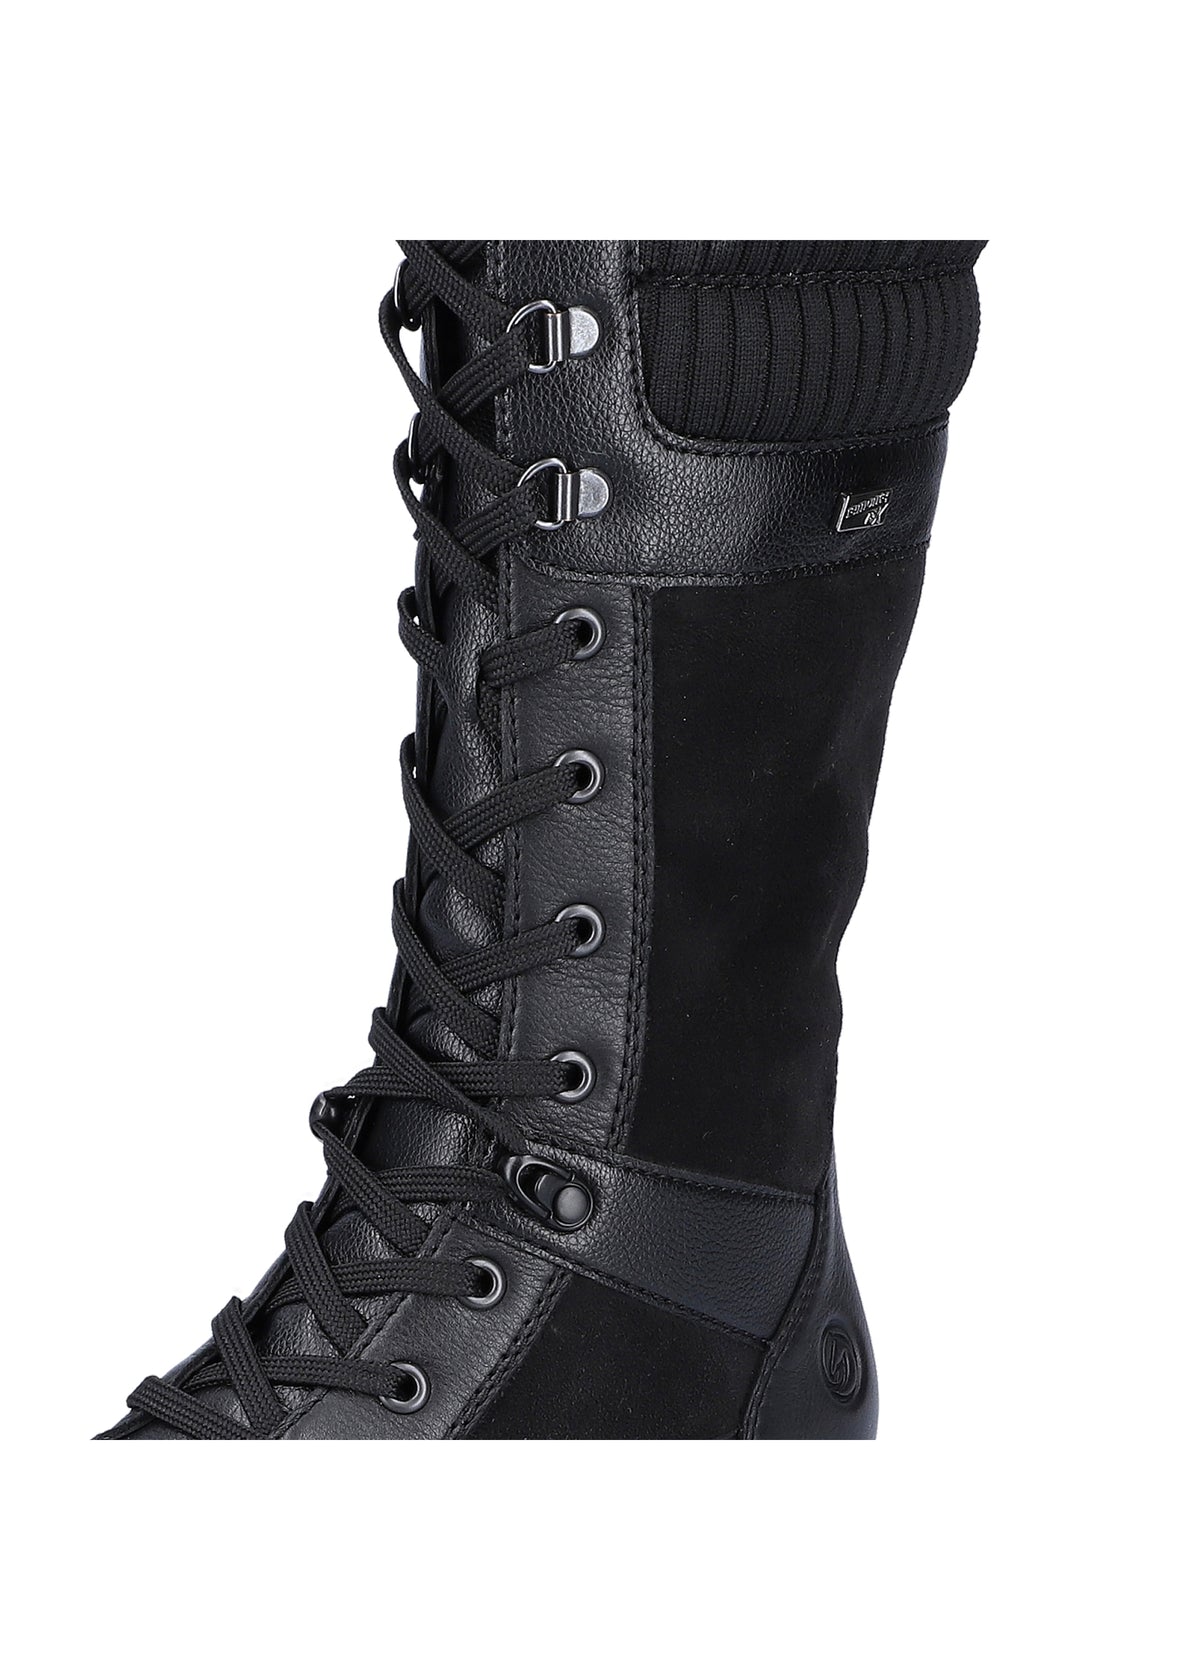 Winter boots with friction sole - black, Remonte-TEX